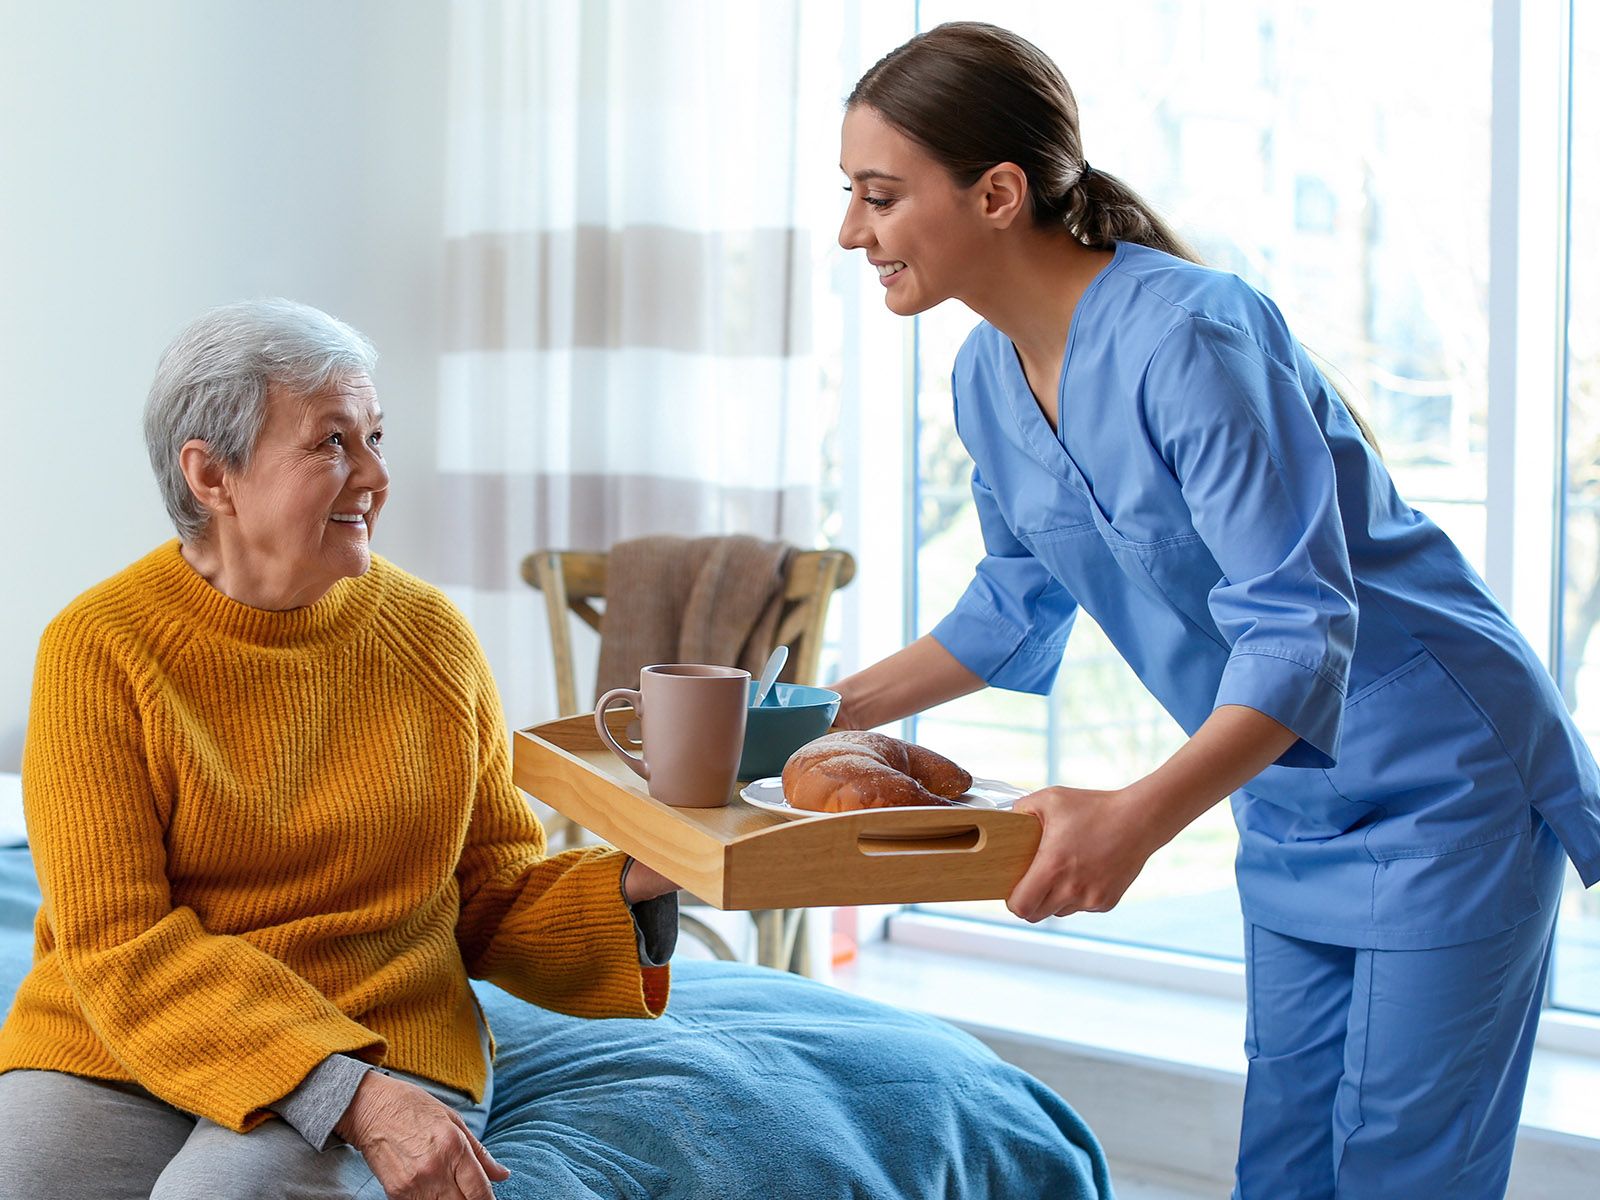 Young female nurse delivers meal to older female patient sitting on bed.